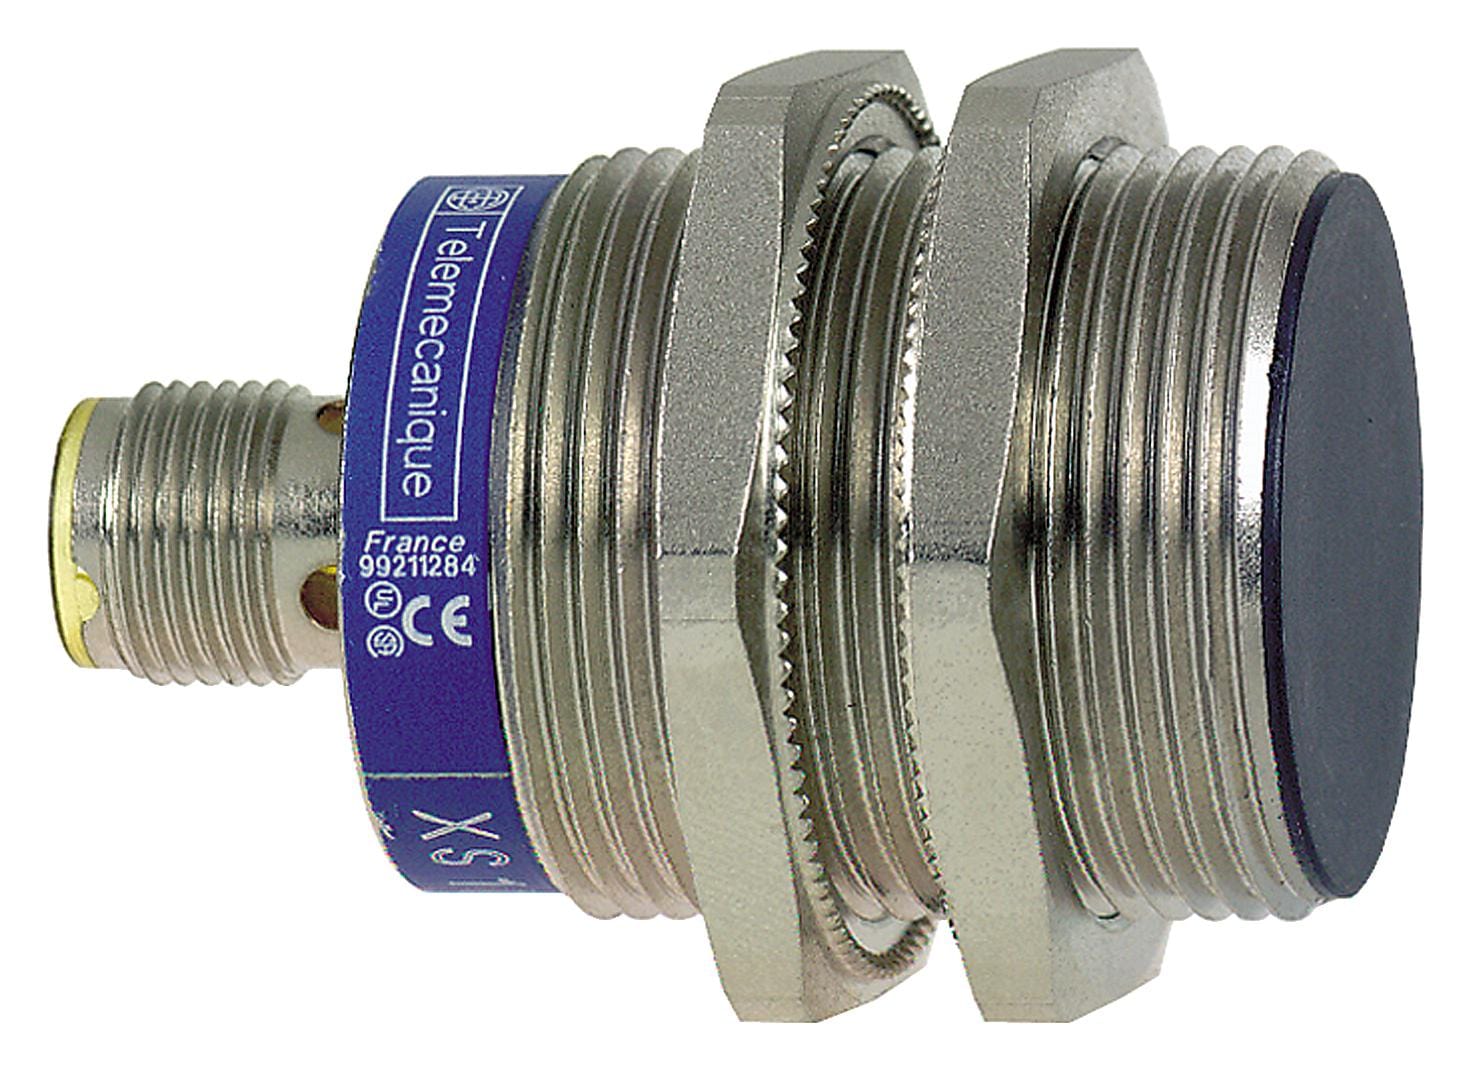 SCHNEIDER ELECTRIC Inductive XS1N30NC410D INDUCTIVE SENSOR, 10MM, NPN, 24V SCHNEIDER ELECTRIC 3113248 XS1N30NC410D